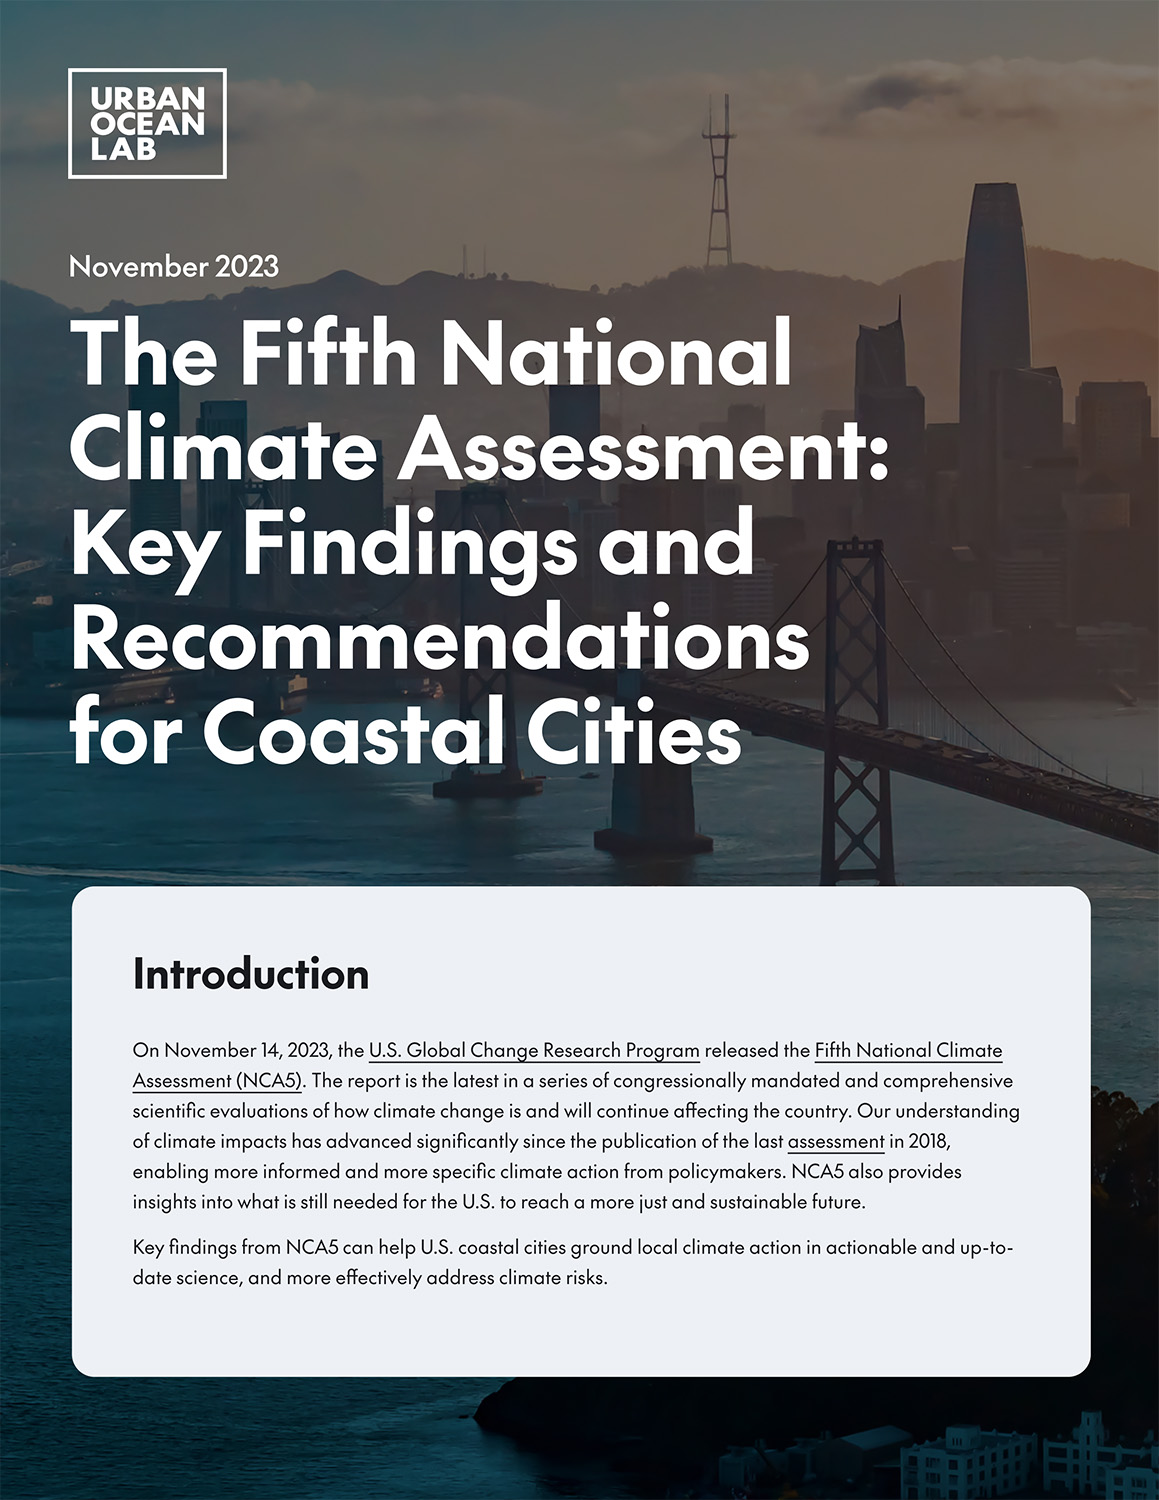 The Fifth National Climate Assessment: Key findings and recommendations for coastal cities